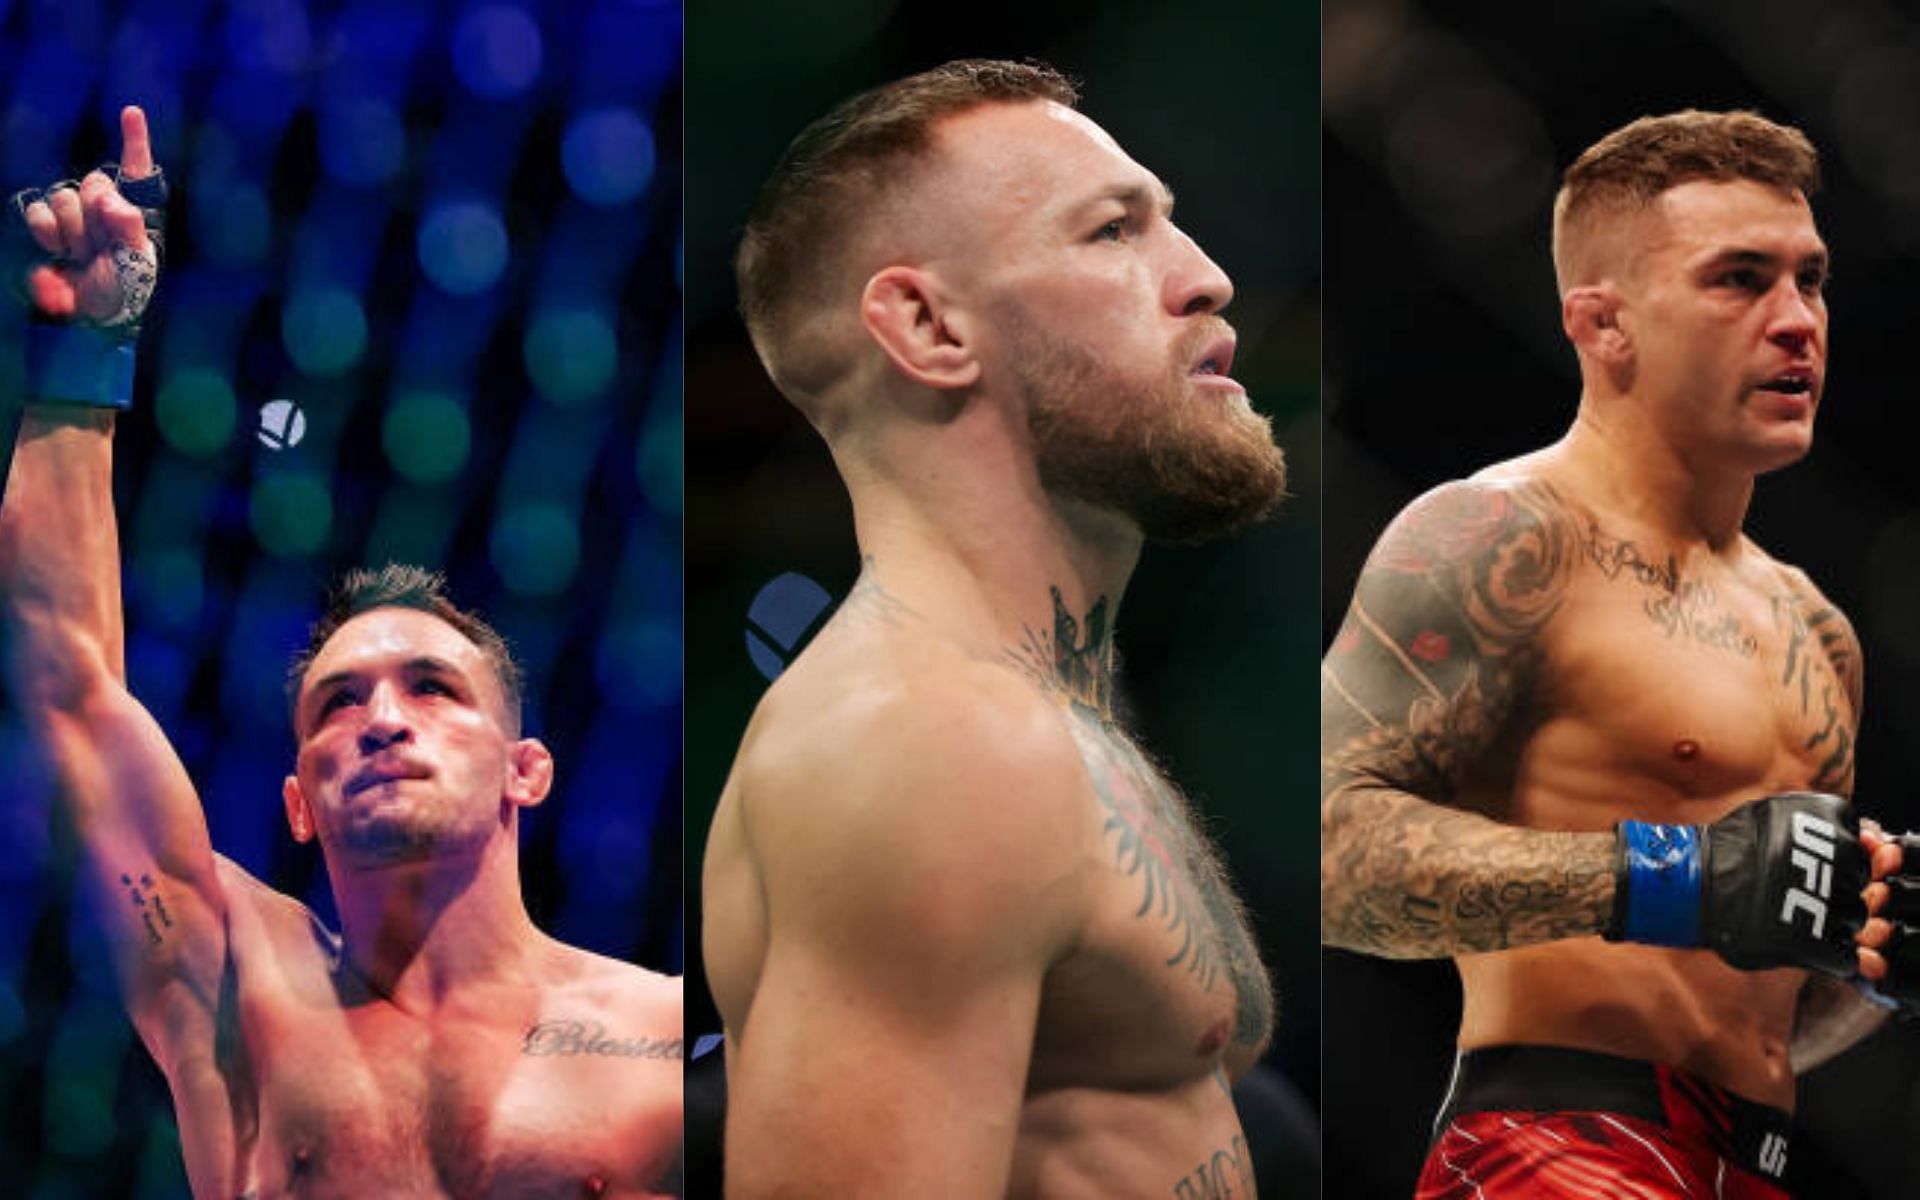 From left to right: Michael Chandler, Conor McGregor, Dustin Poirier